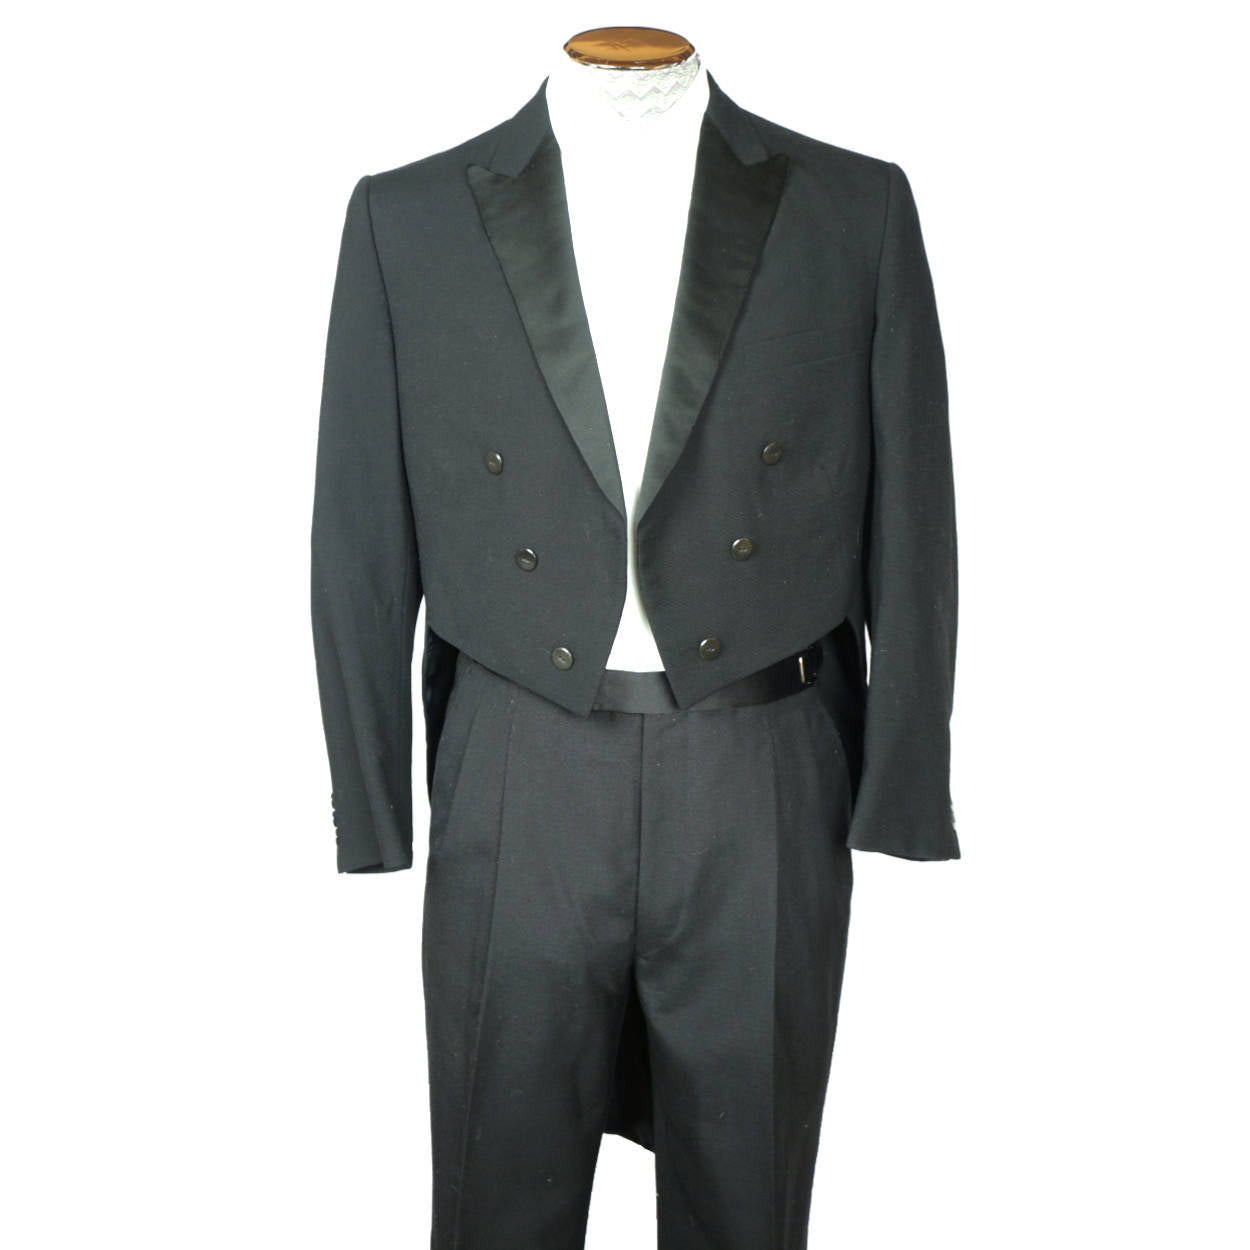 Vintage 1960s Tuxedo Tailcoat Formal Tails Custom Tailored Size M L ...